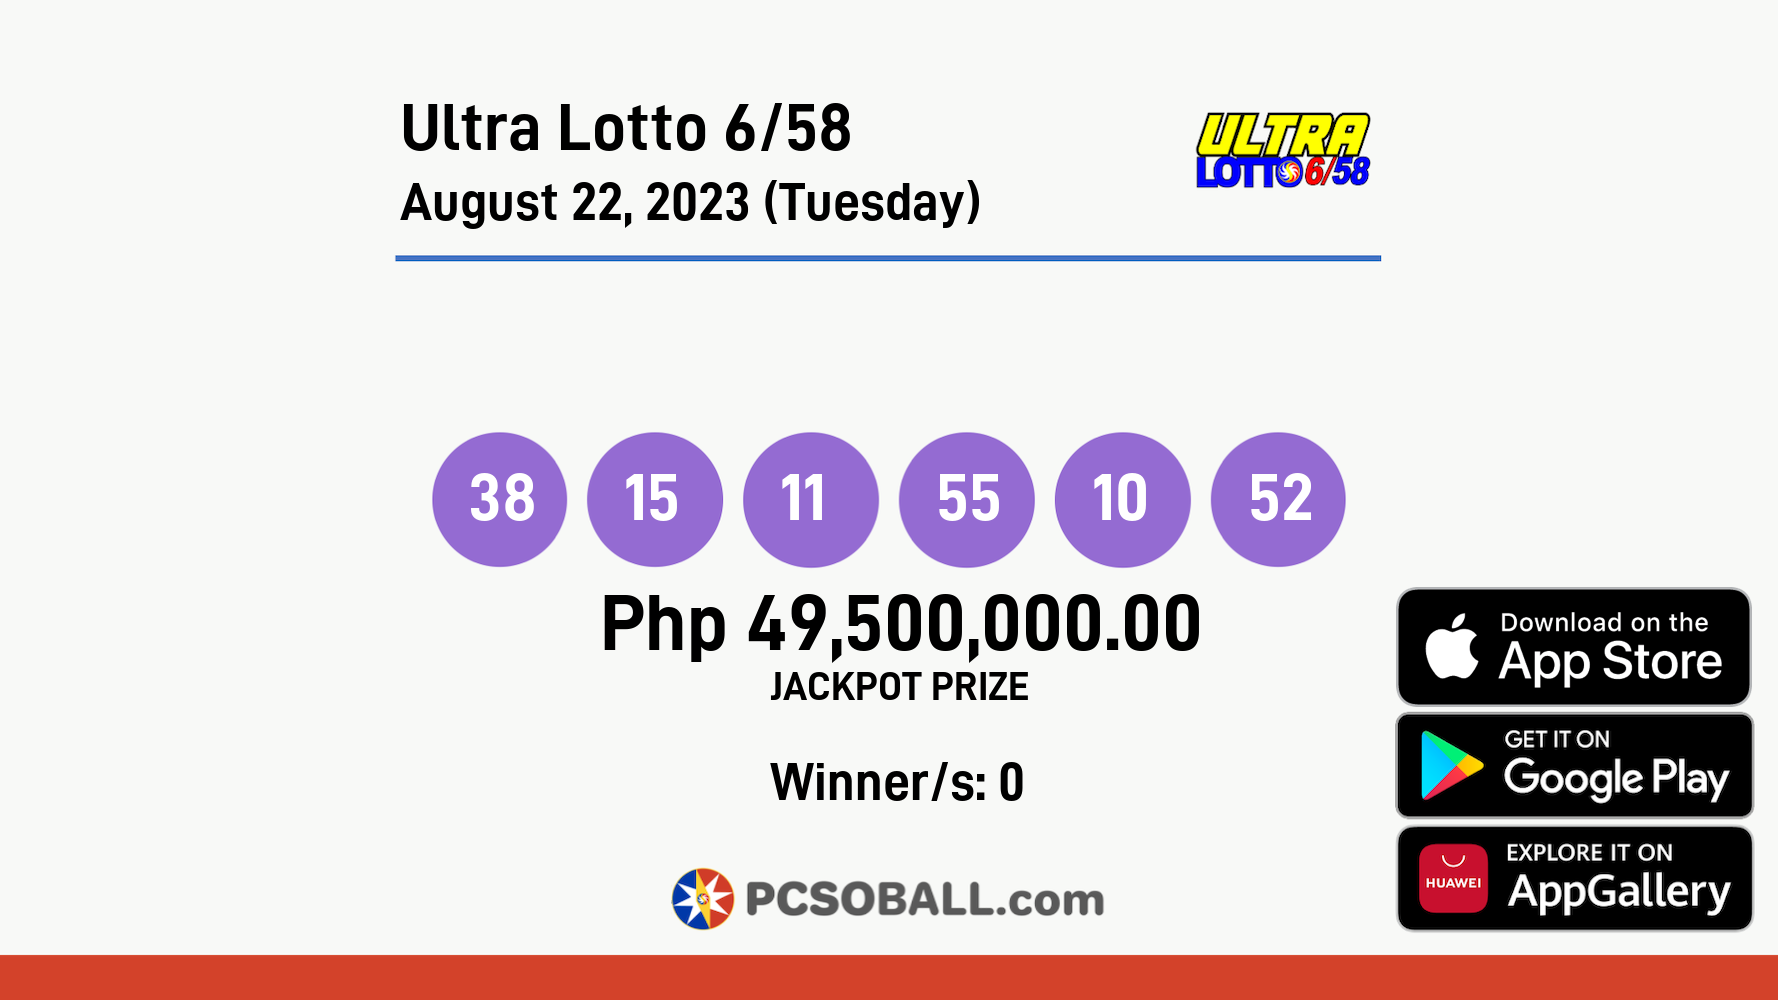 Ultra Lotto 6/58 August 22, 2023 (Tuesday) Result